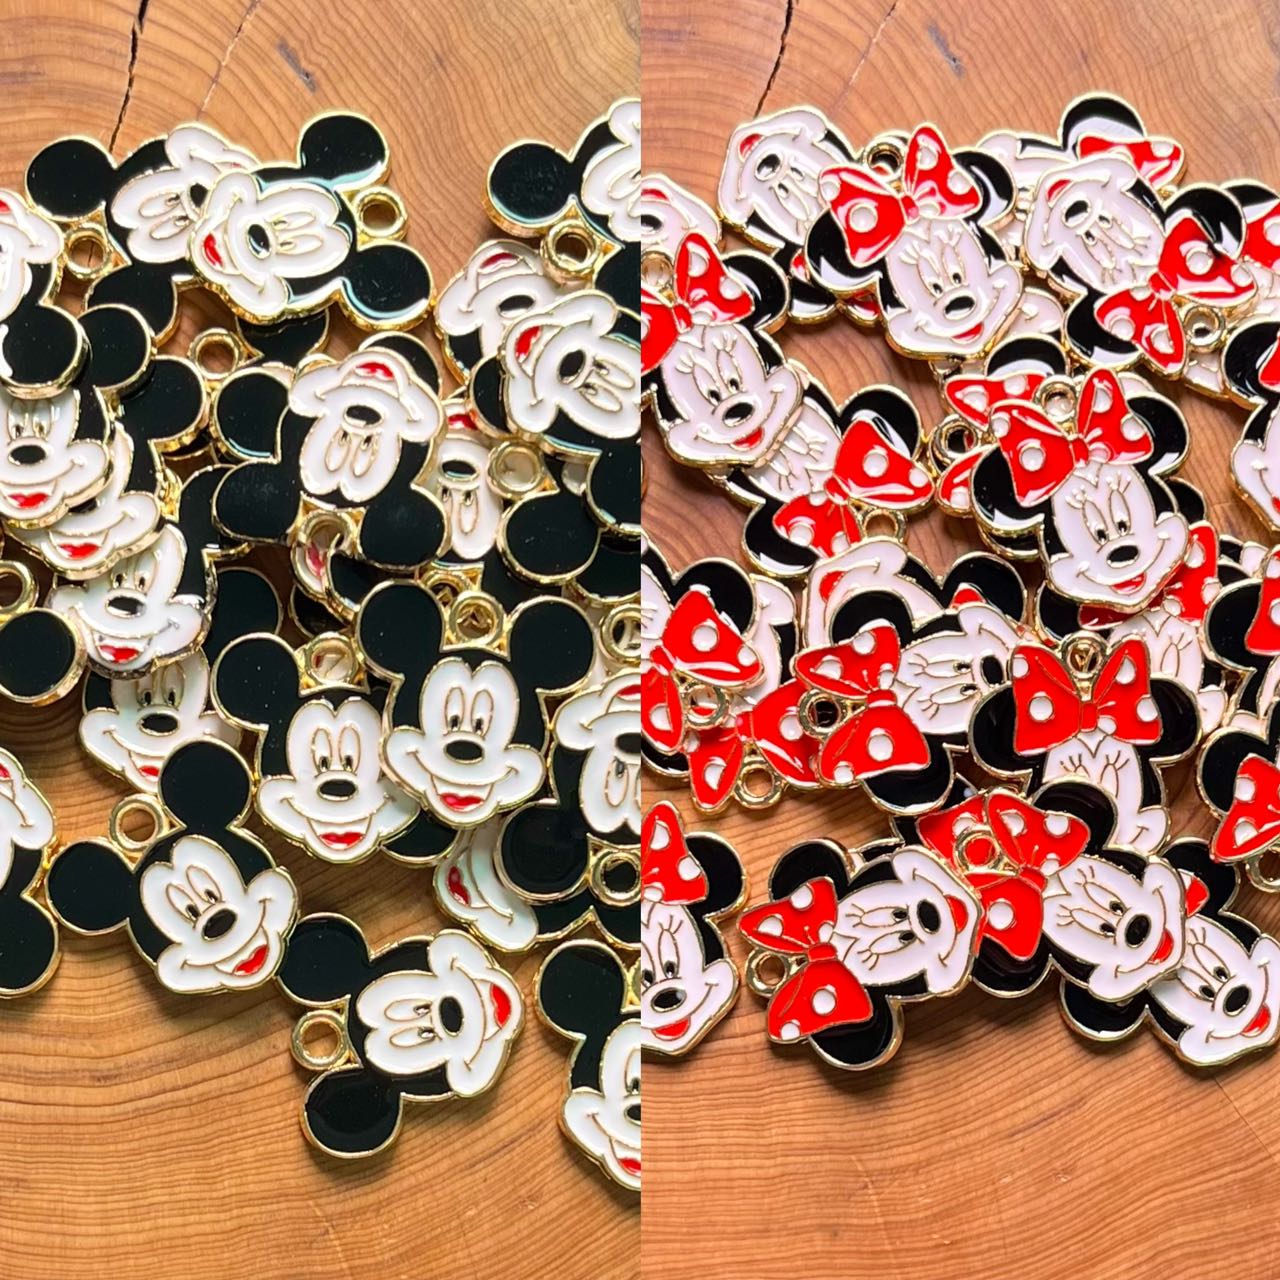 DIY Mickey Mouse accessories 30pcs